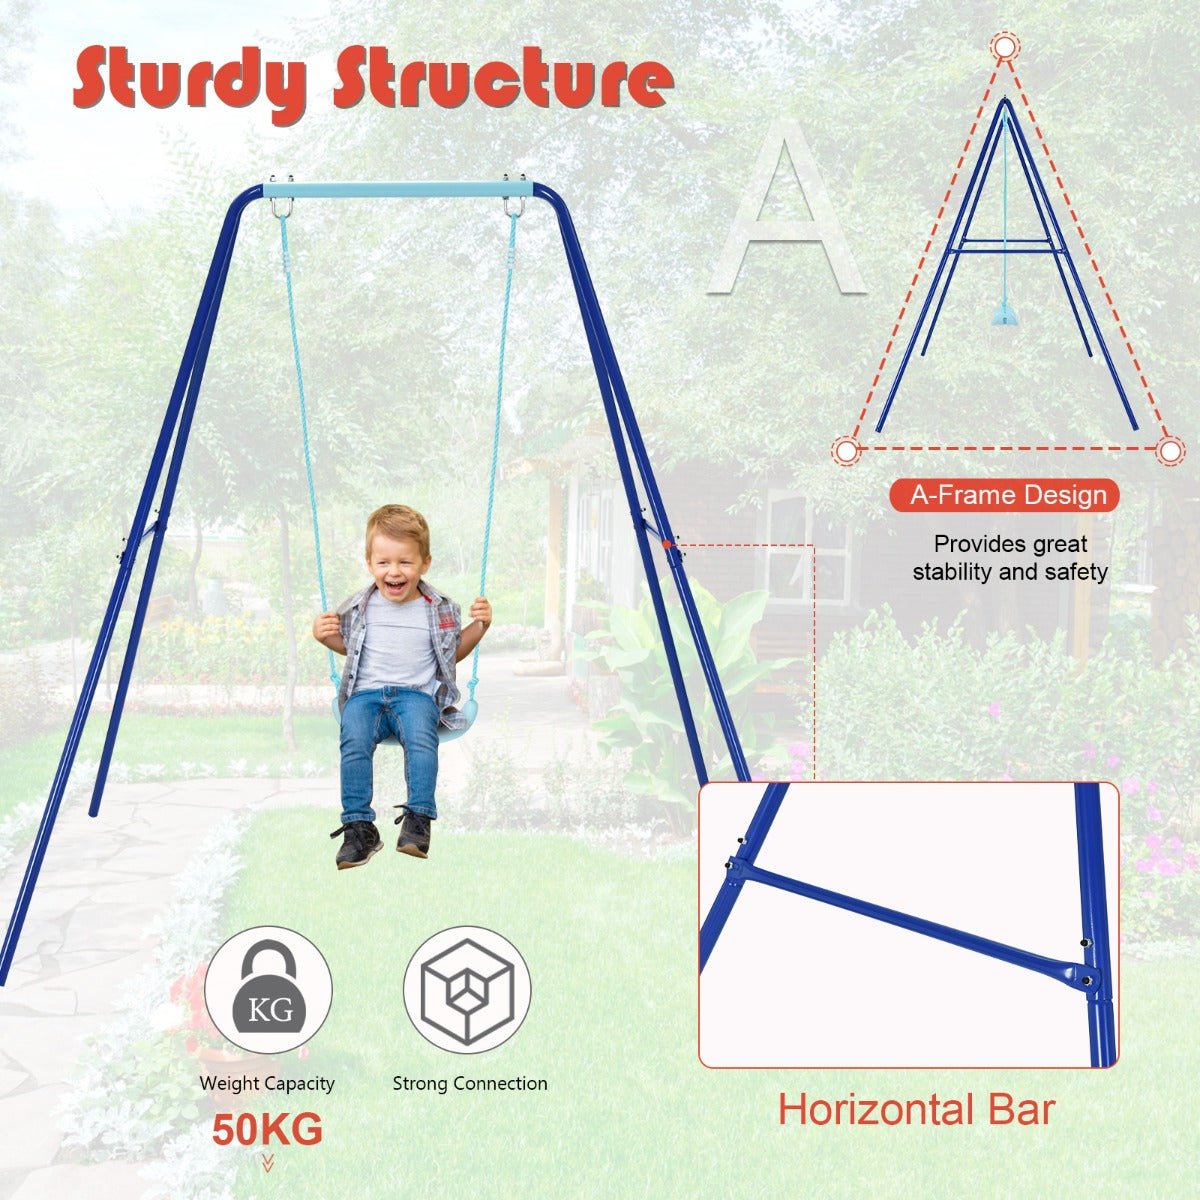 Cool Blue Swing Set: Sturdy A-Frame Metal Design for Play